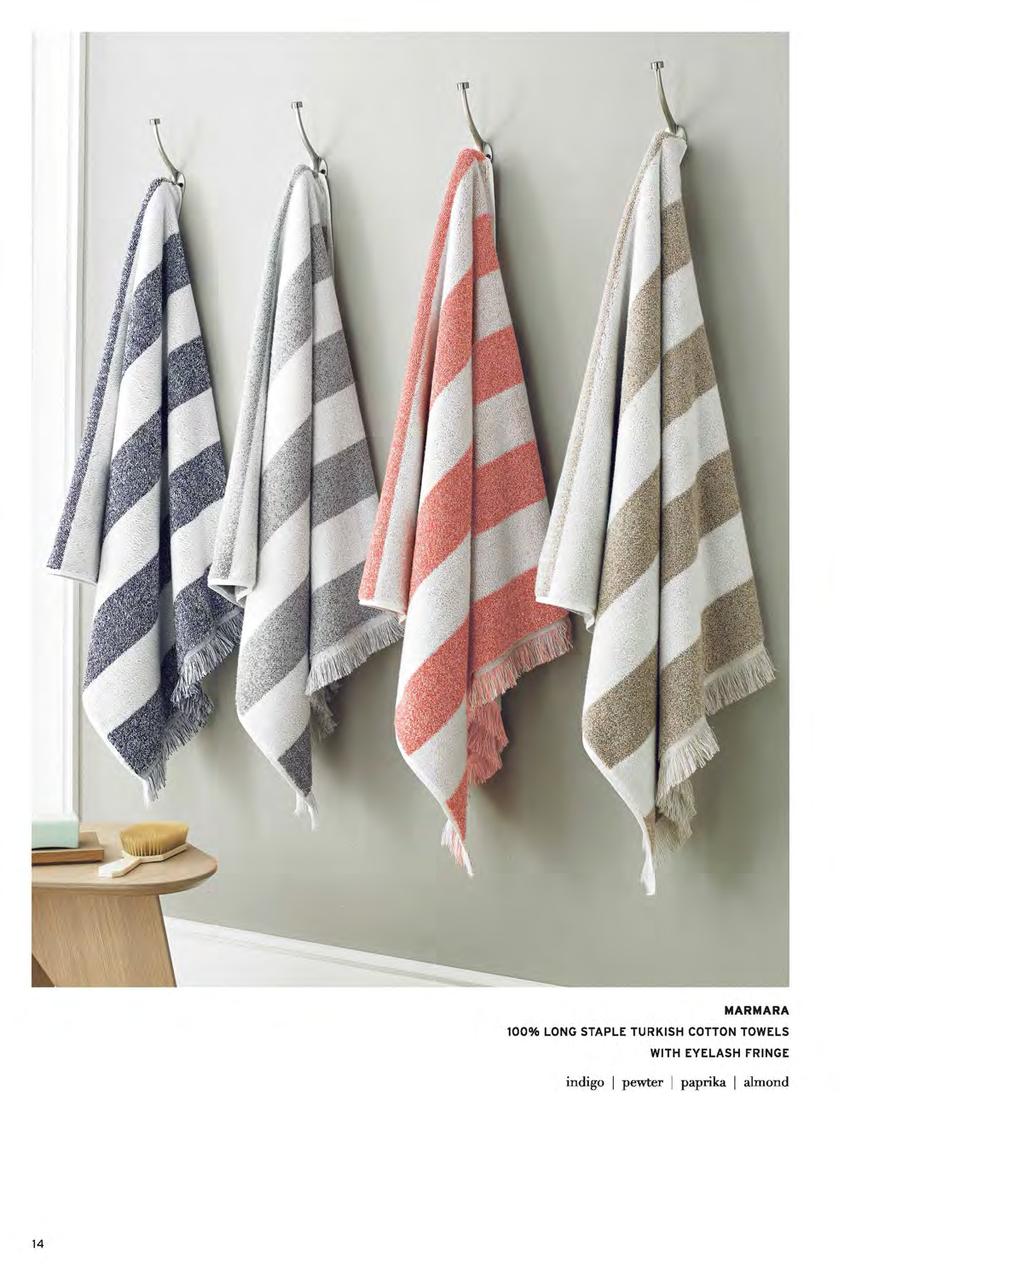 MARMARA 100% LONG STAPLE TURKISH COTTON TOWELS WITH